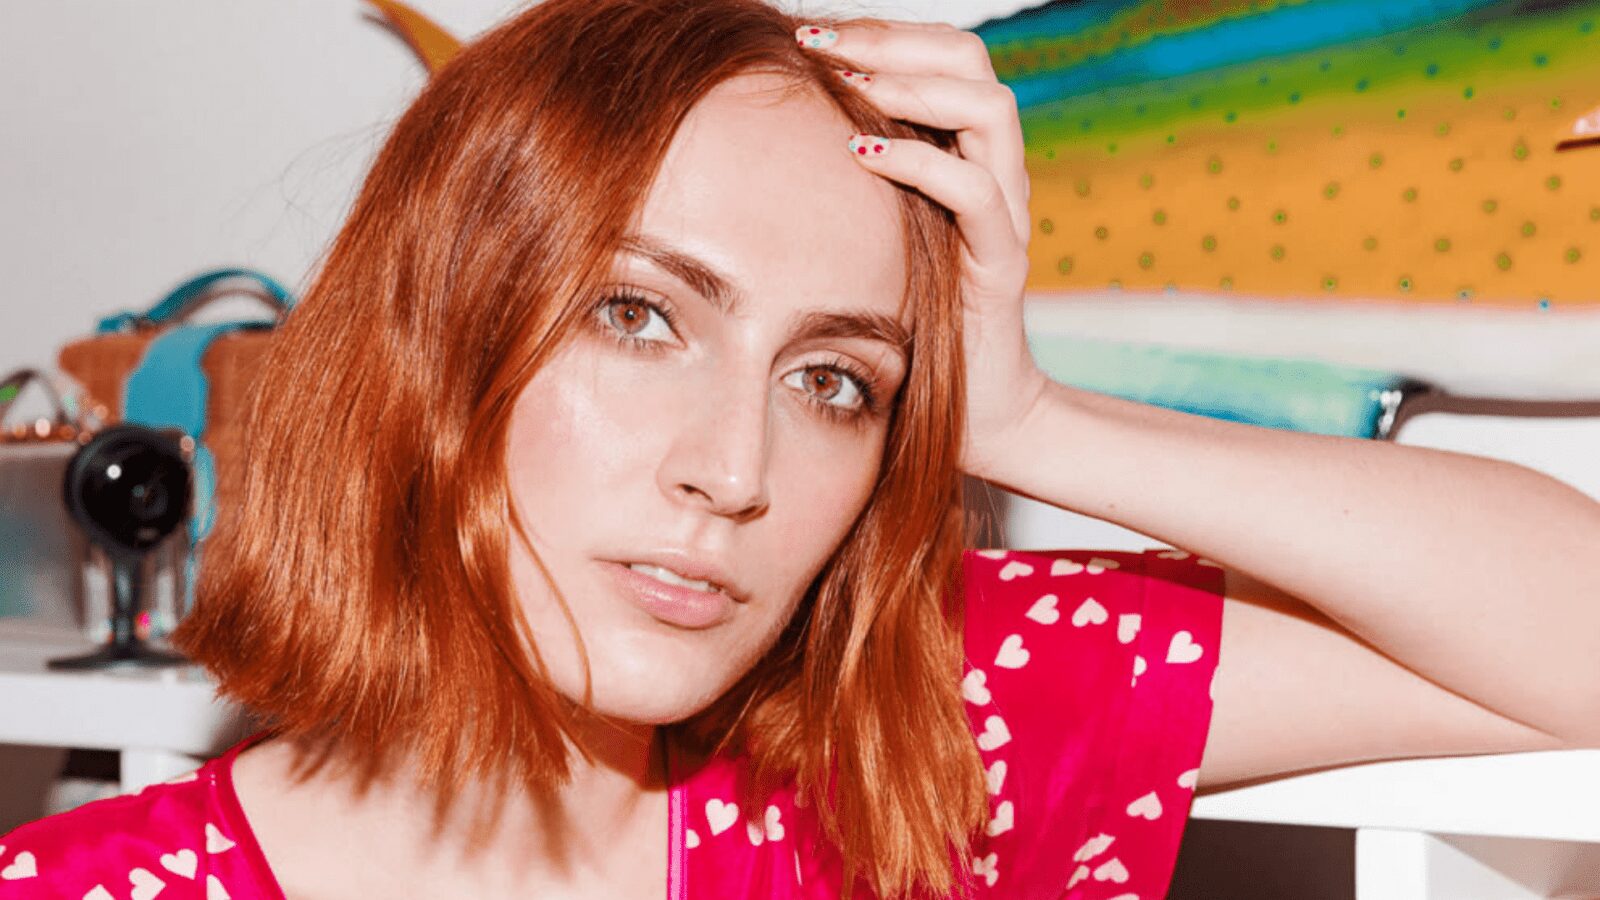 6 Tips For Getting a Dewy Redhead Makeup Look